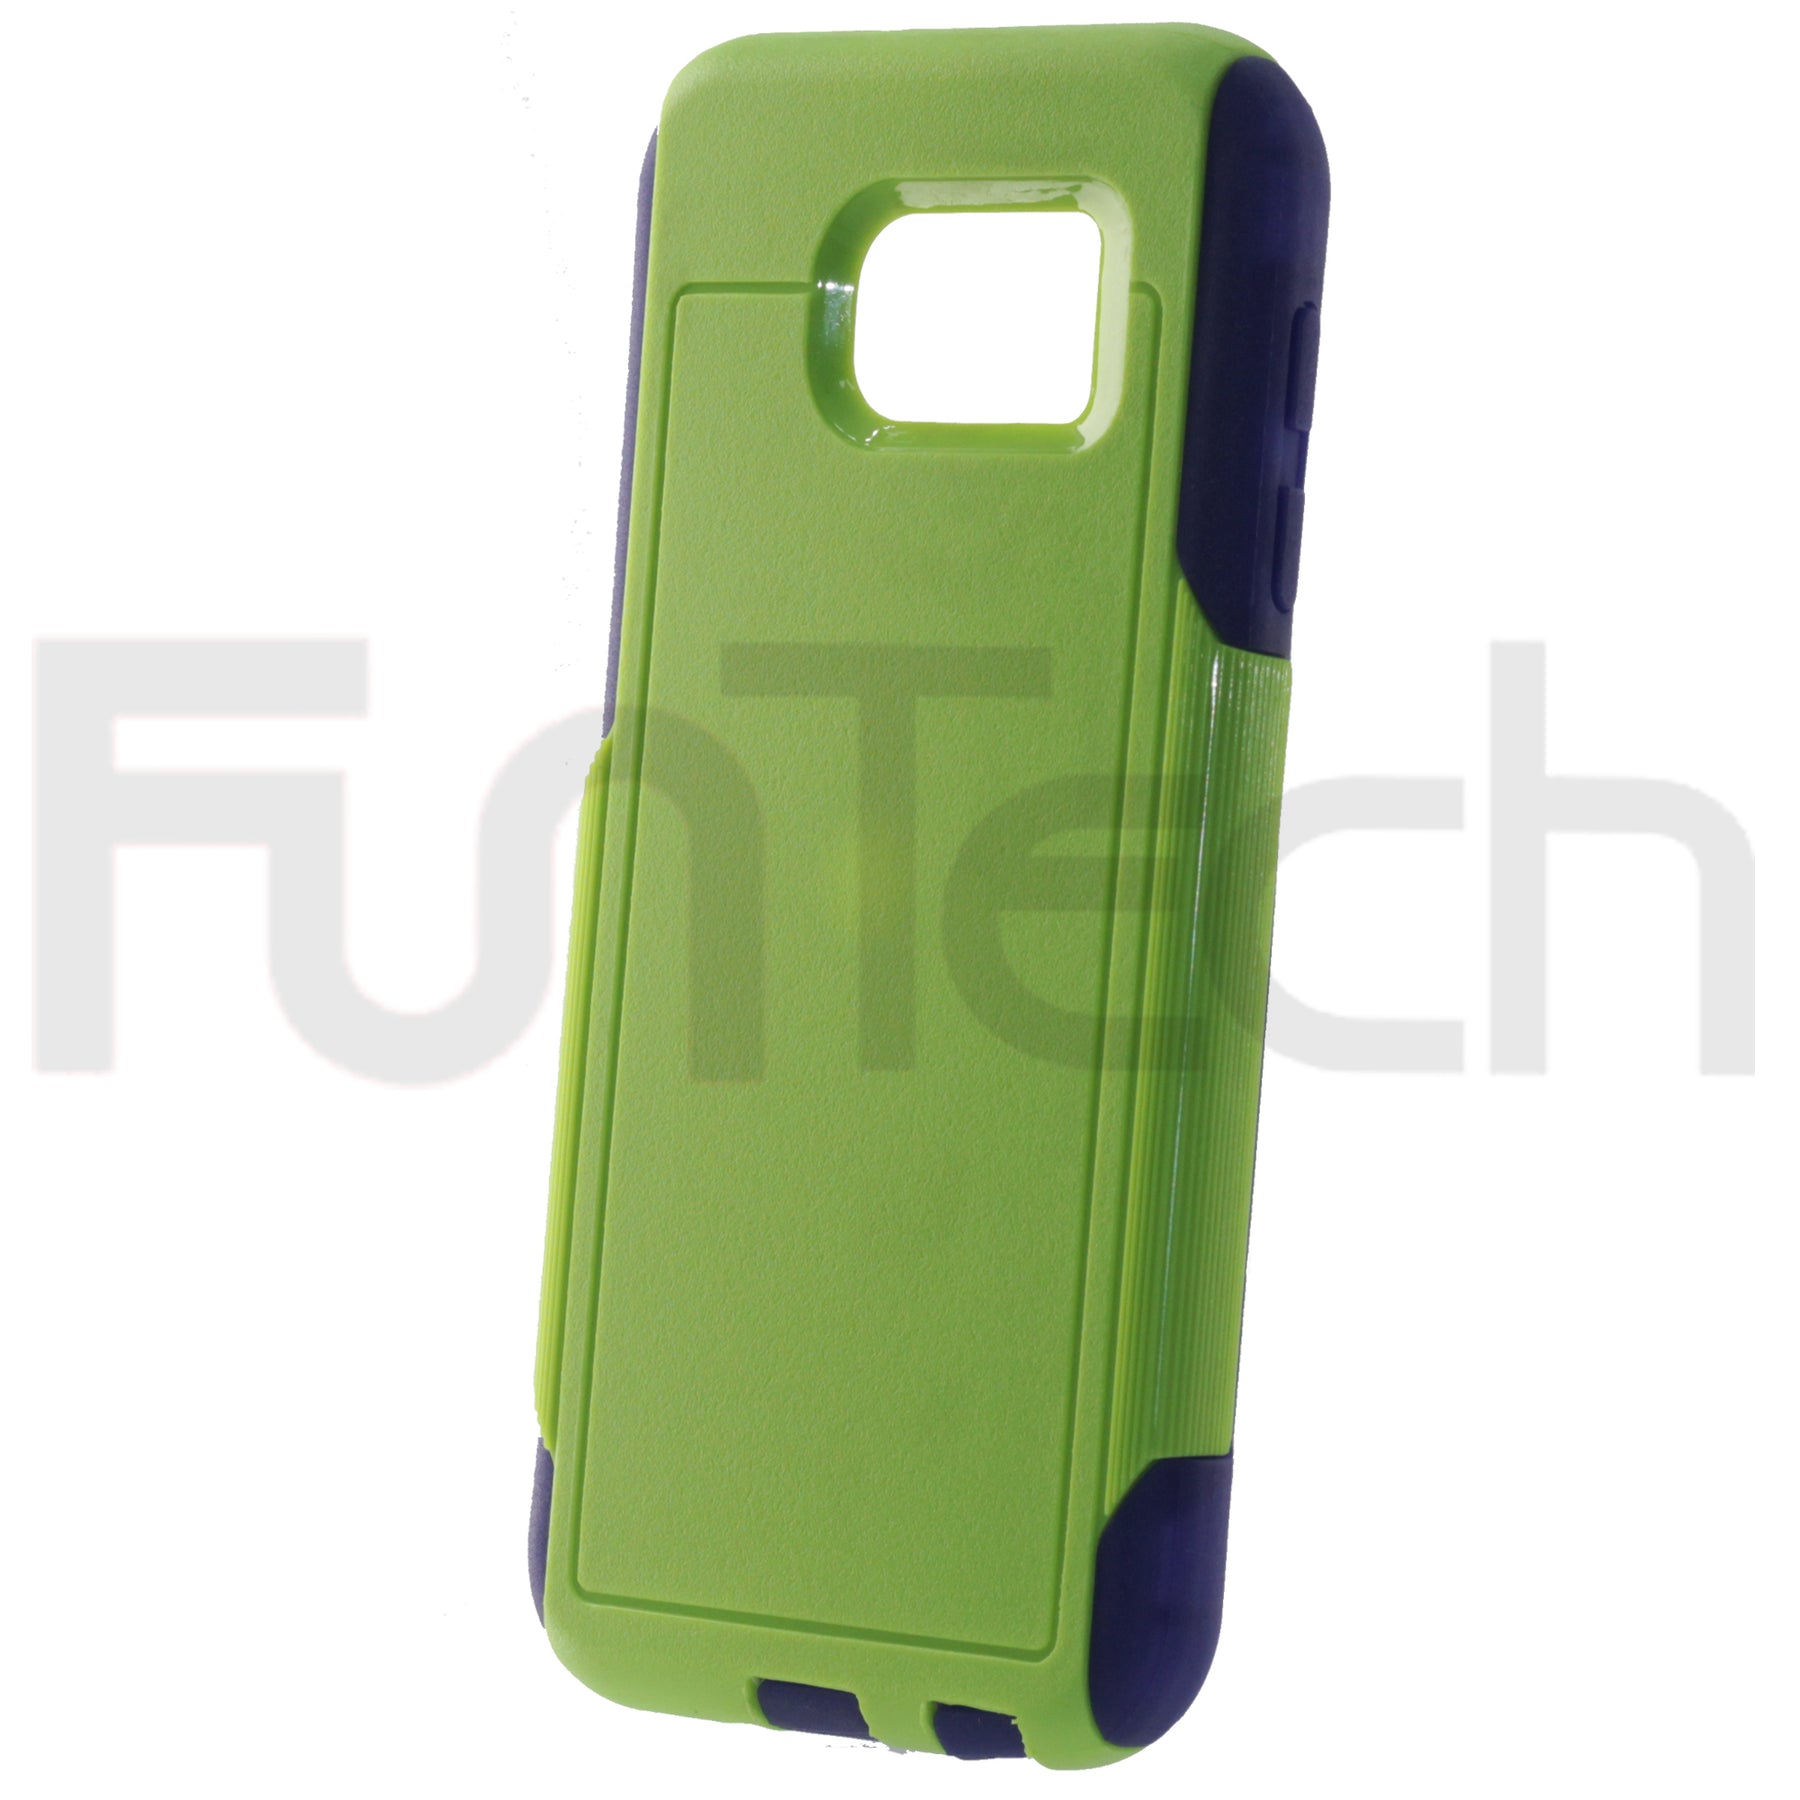 Samsung S6, Commuter Series Cover Case, Color Green.